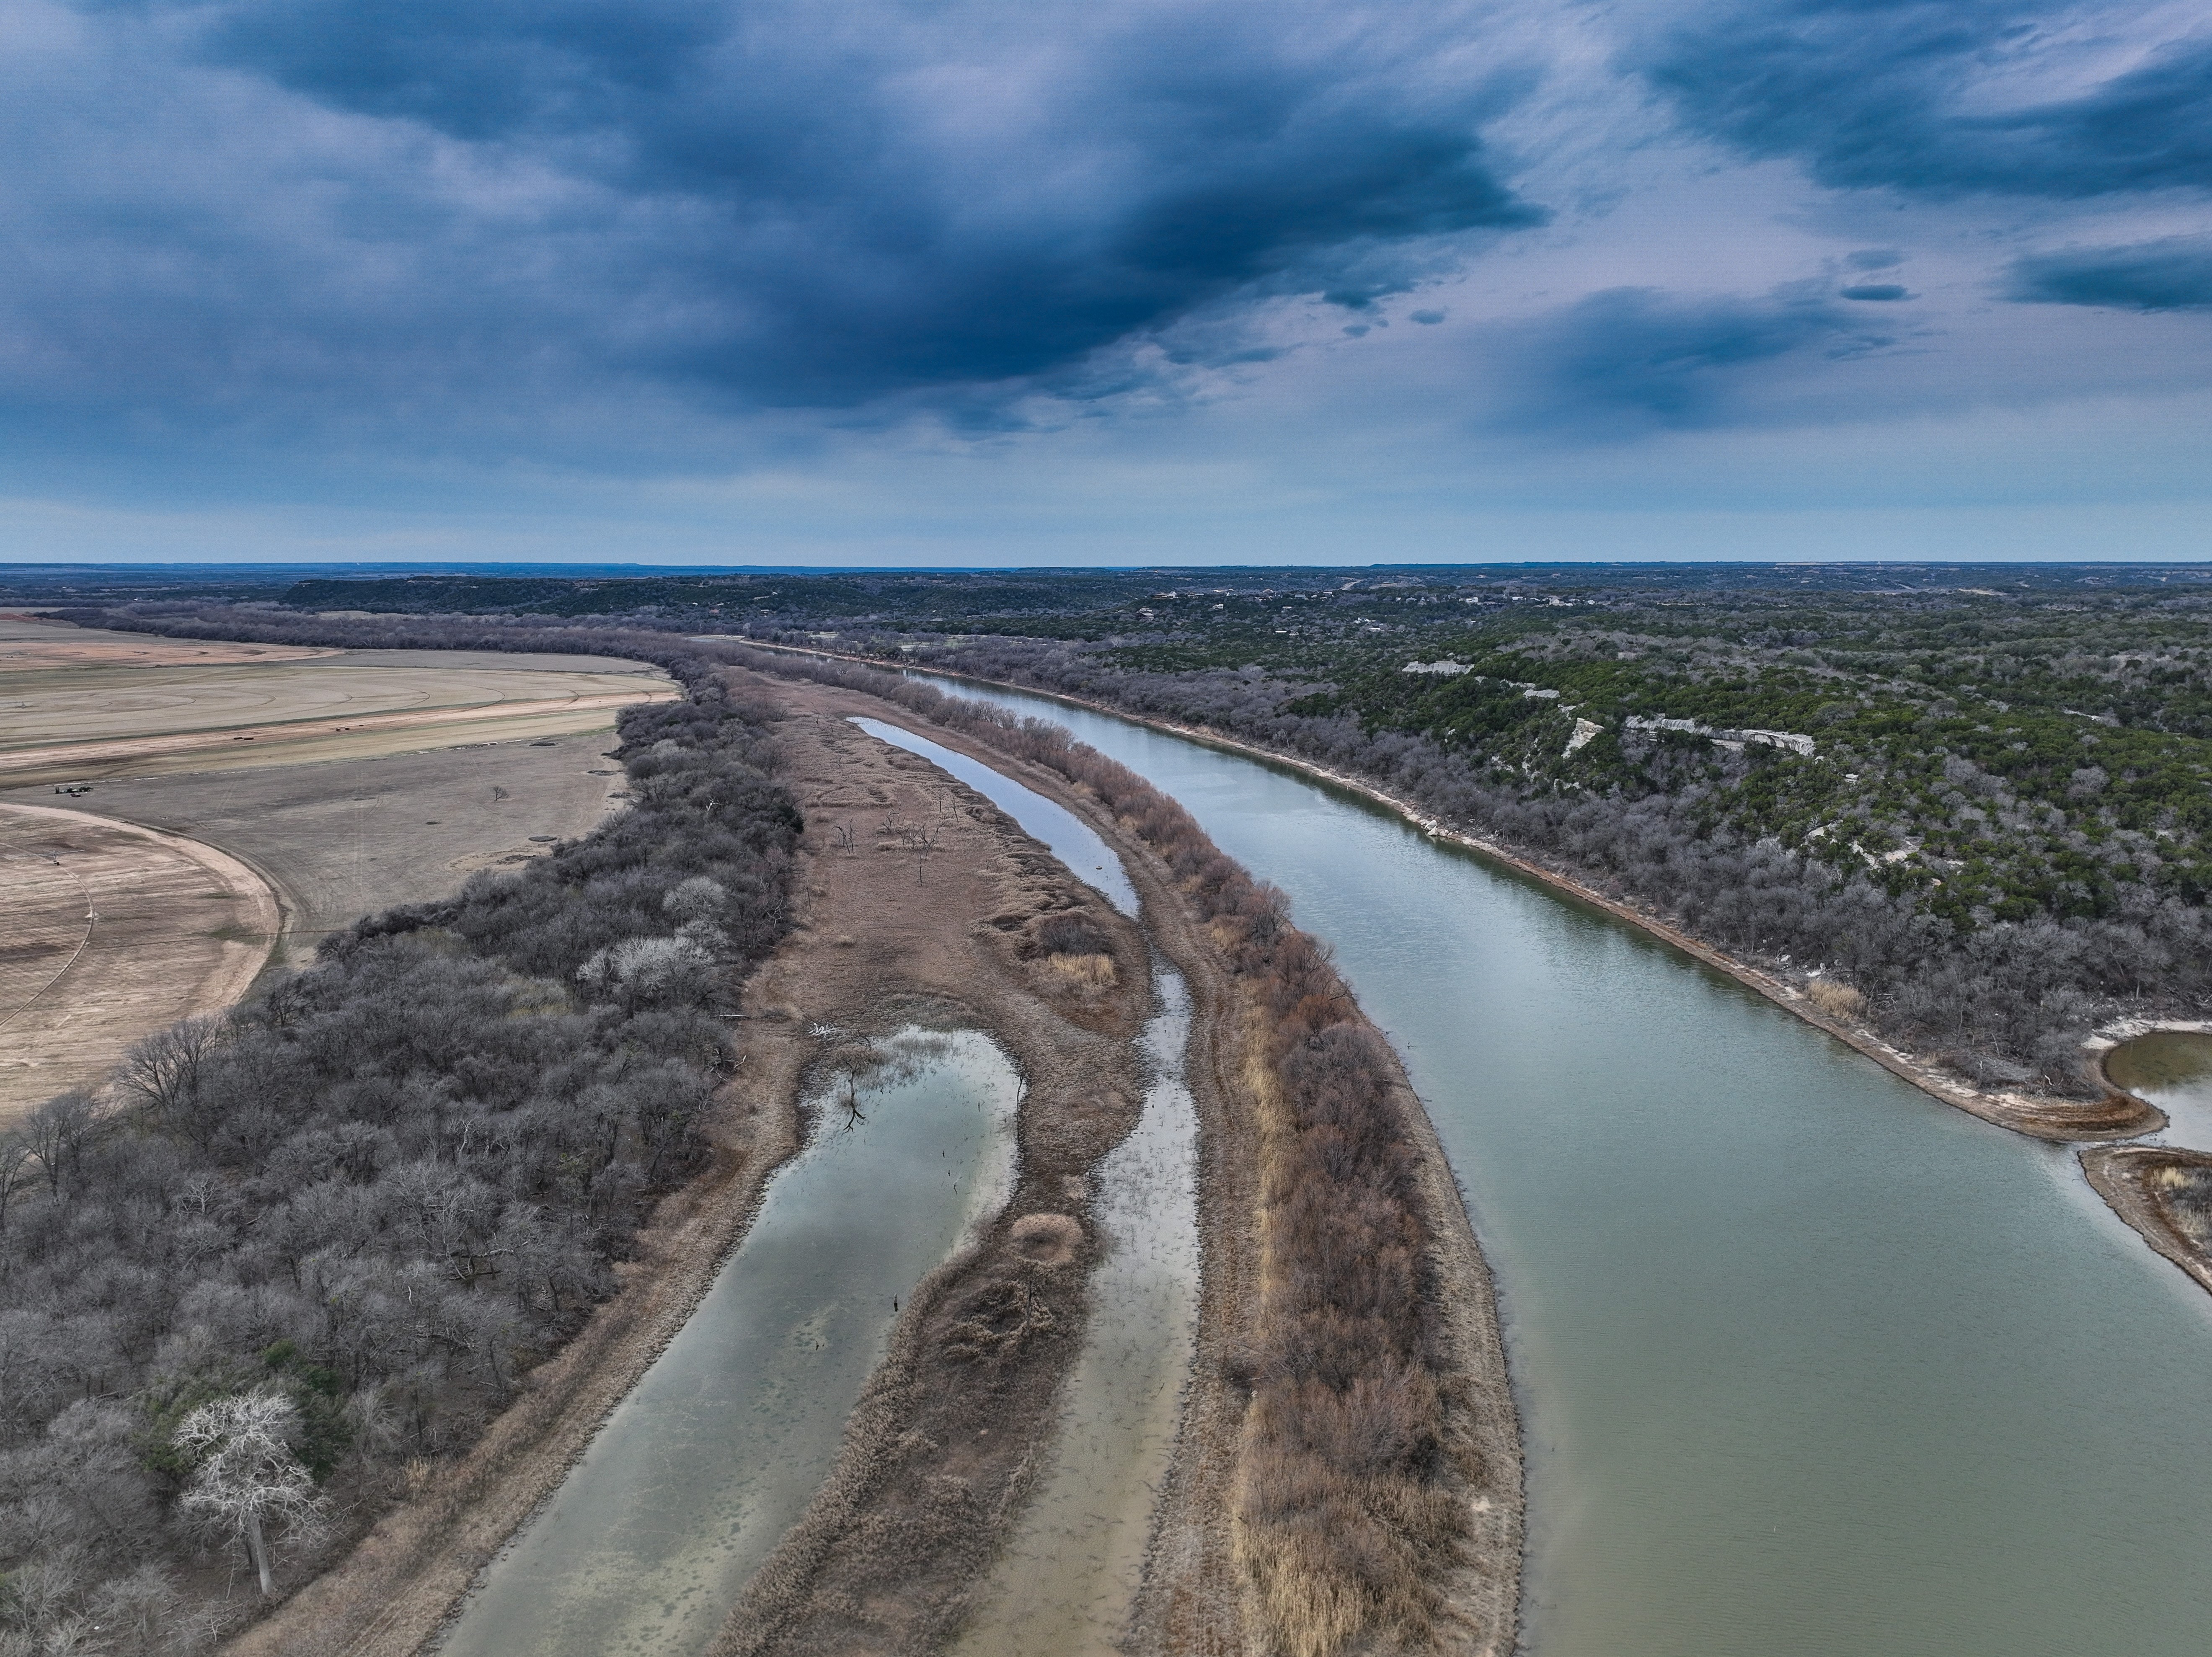 Drone footage of the Brazos River